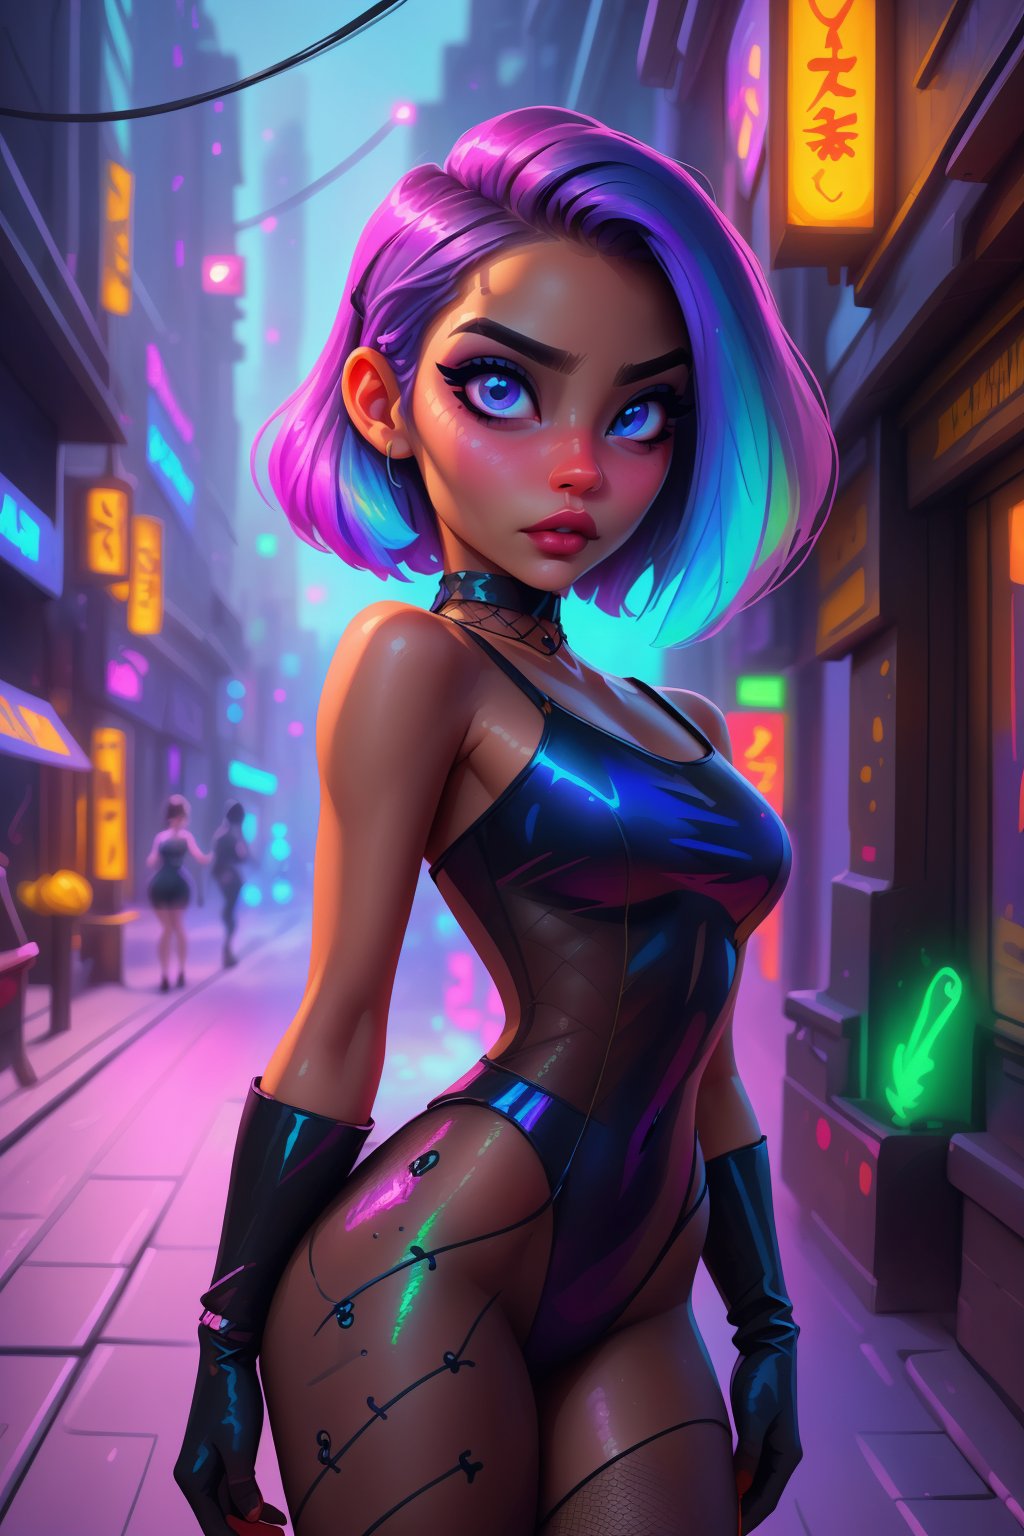 Stunning 25yo Vietnamese-Japanese Woman, model bombshell, beautiful, sensual, young-looking, luxurious elegant multi-color short side-shaved hair, tight SFW-revealing iridescent see-through metallic multi-color fishnet-leotard, glowing iridescent fishnet-gloves and fishnet-choker, neon, futuristic, posing on a futuristic desert city, sensually staring at viewer, arching back, sensually parting lips with iridescent lipstick, Summer time, dusk time, "sinozick style", "g4n1m3"